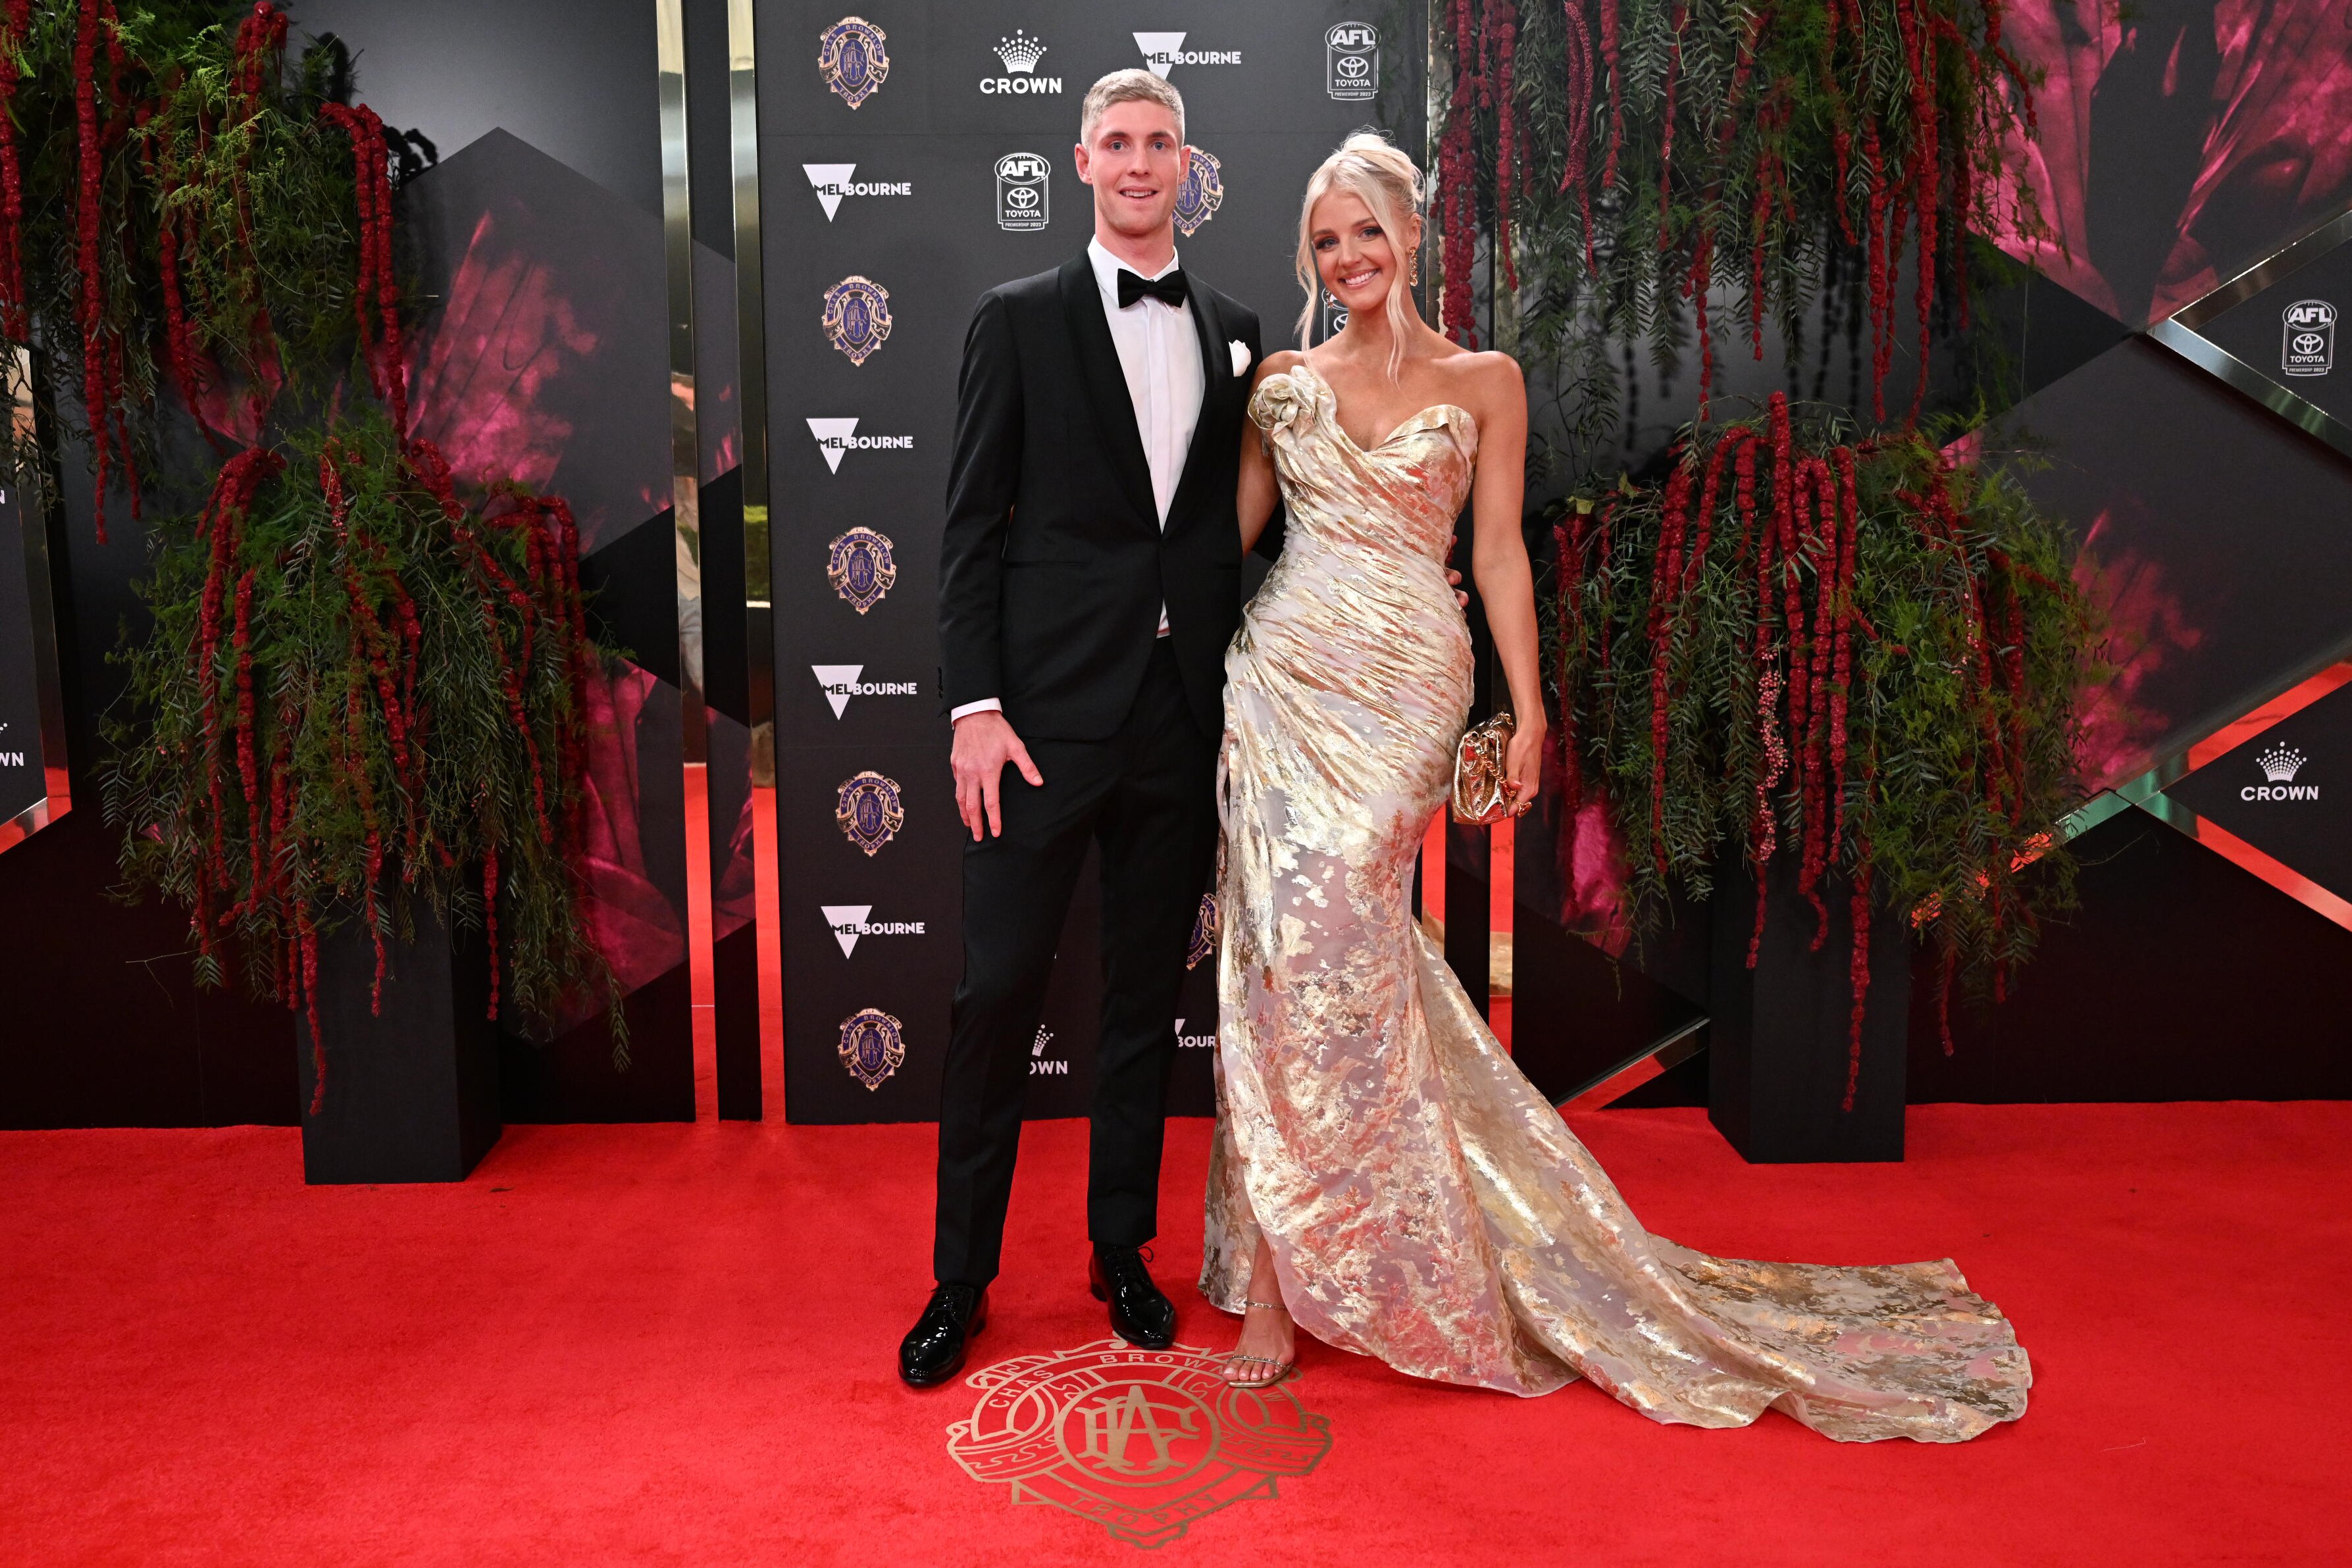 Western Bulldogs' Tim English with partner and netballer Rudi Ellis looking radient in gold.